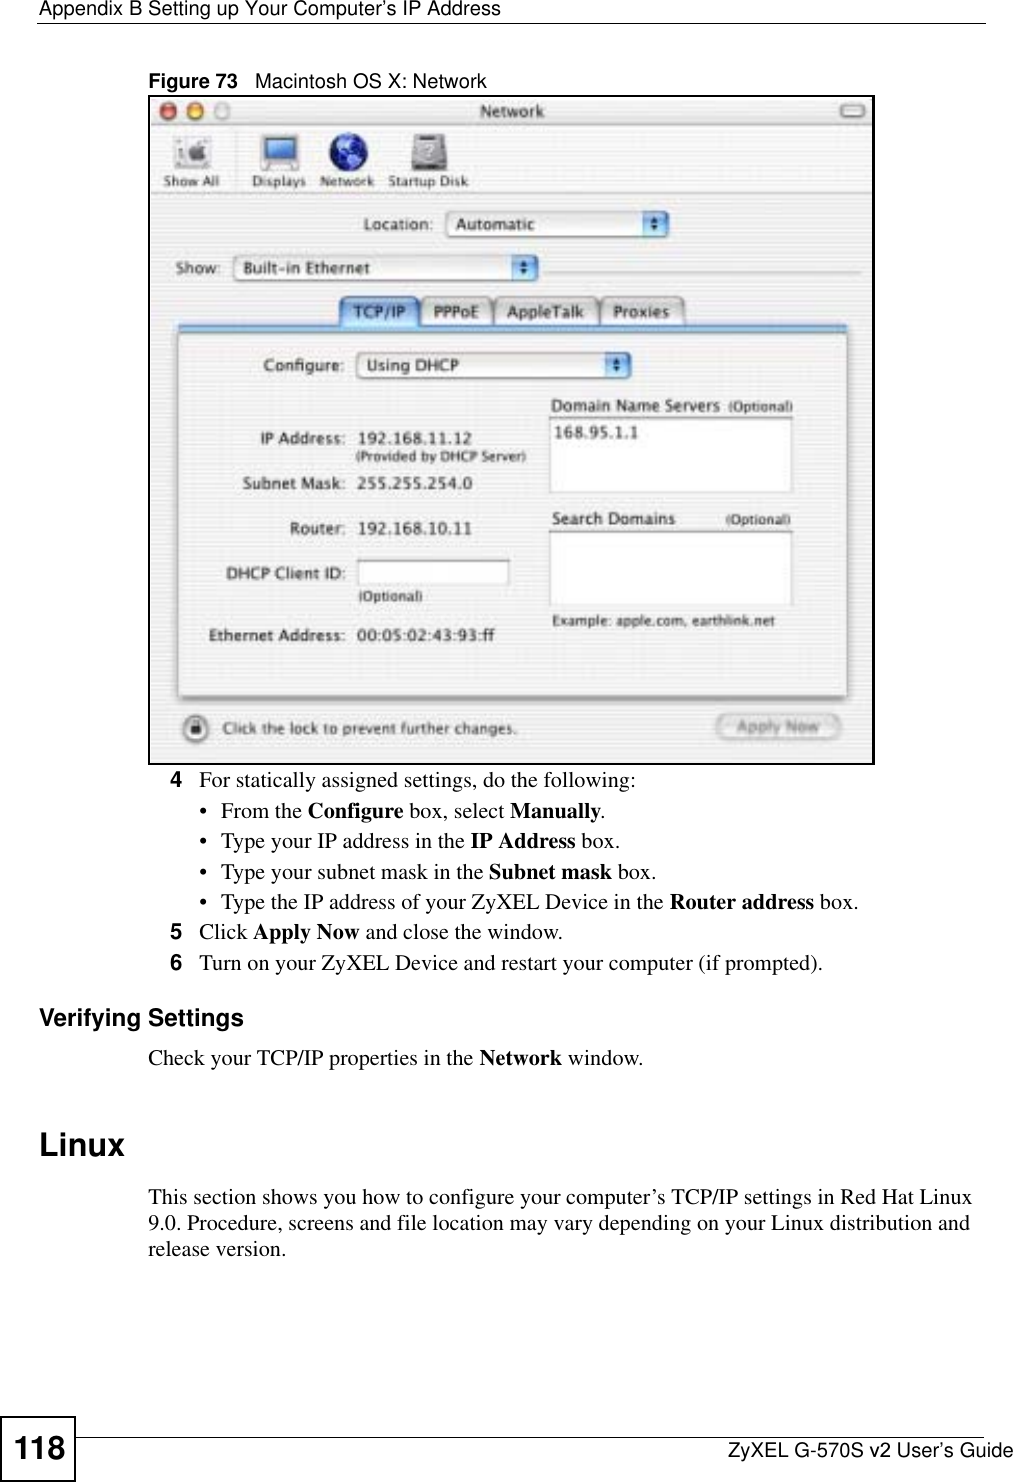 Appendix B Setting up Your Computer’s IP AddressZyXEL G-570S v2 User’s Guide118Figure 73   Macintosh OS X: Network4For statically assigned settings, do the following:•From the Configure box, select Manually.• Type your IP address in the IP Address box.• Type your subnet mask in the Subnet mask box.• Type the IP address of your ZyXEL Device in the Router address box.5Click Apply Now and close the window.6Turn on your ZyXEL Device and restart your computer (if prompted).Verifying SettingsCheck your TCP/IP properties in the Network window.LinuxThis section shows you how to configure your computer’s TCP/IP settings in Red Hat Linux 9.0. Procedure, screens and file location may vary depending on your Linux distribution and release version. 